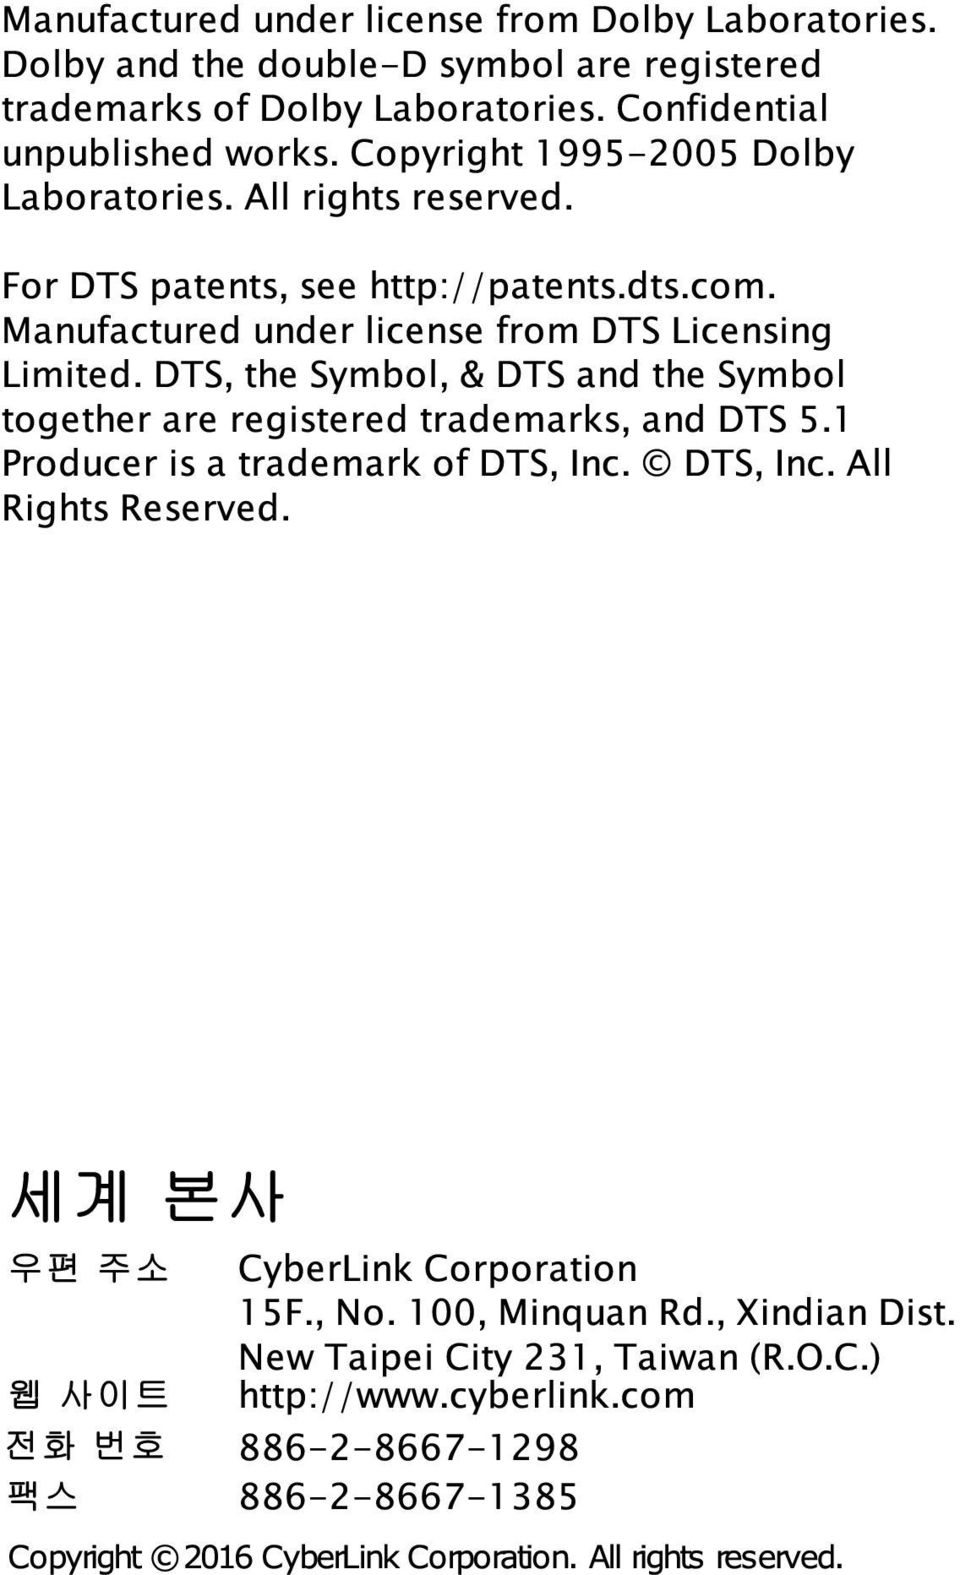 DTS, Symbol, & DTS and Symbol toger are registered trademarks, and DTS 5.1 Producer is a trademark of DTS, Inc. DTS, Inc. All Rights Reserved.